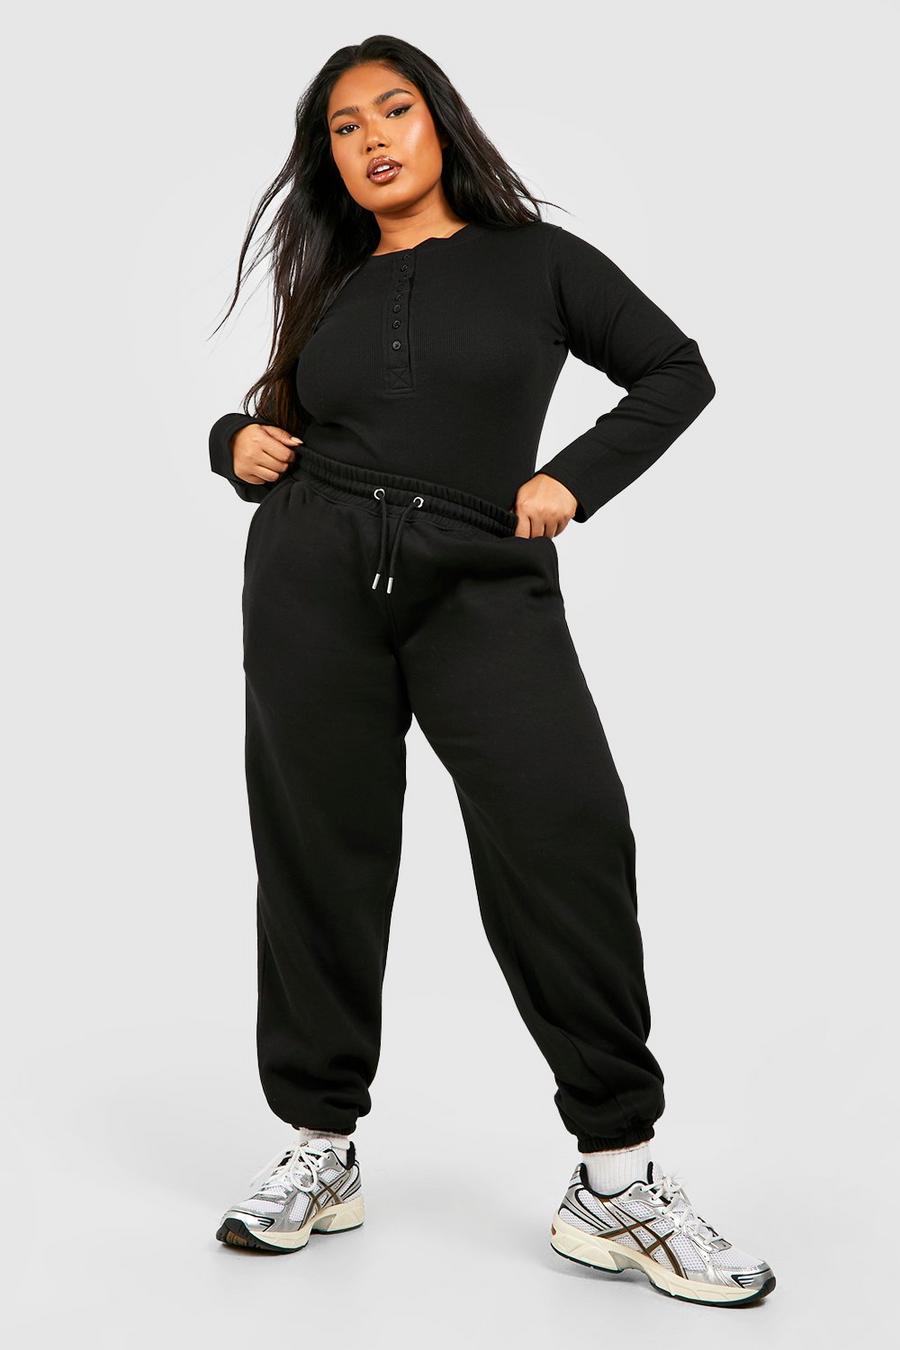 Black Plus Button Detail Bodysuit And Cuffed Oversized Jogger Set